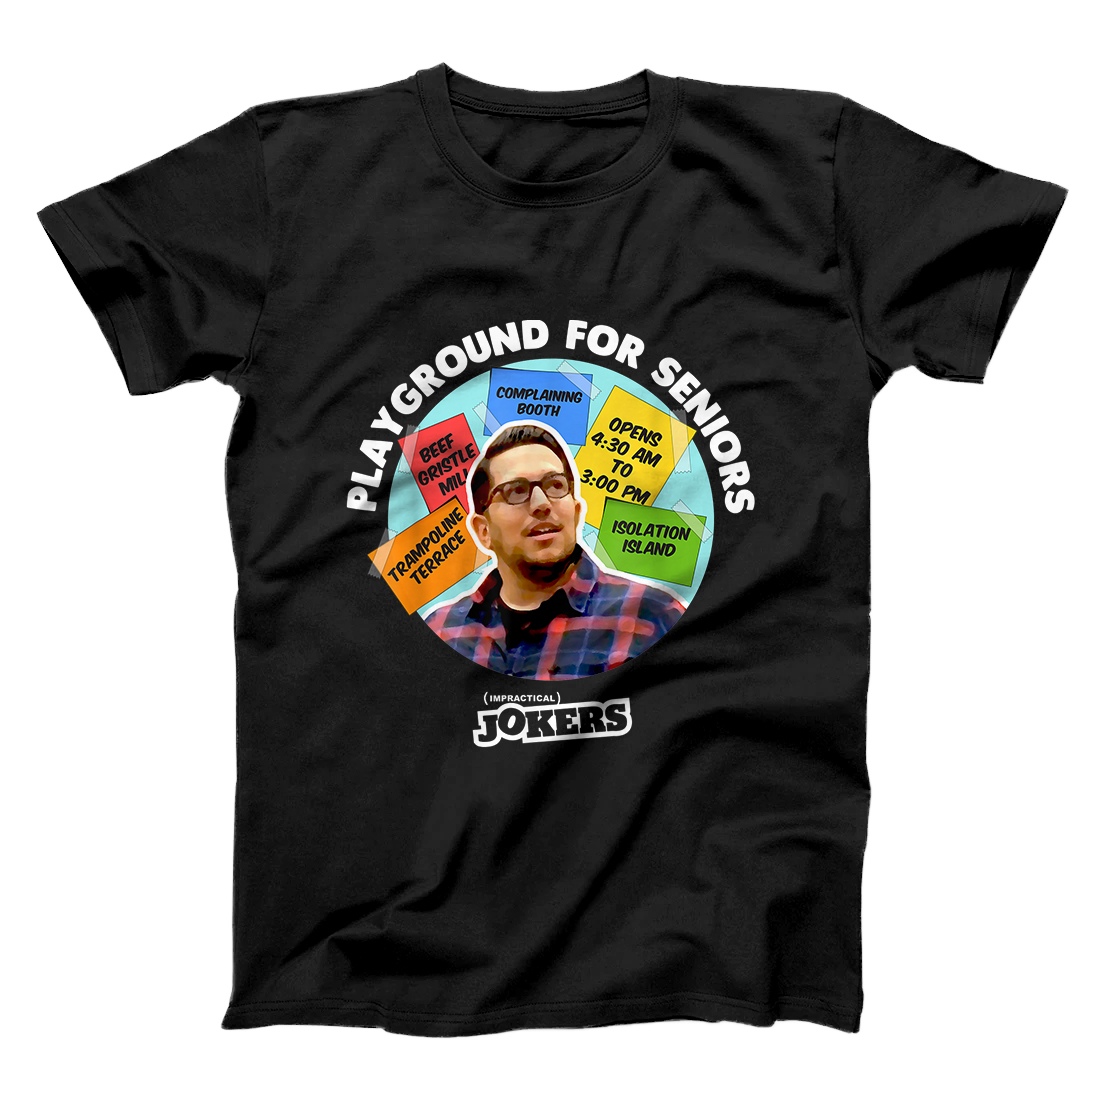 Personalized Impractical Jokers shirt Playground For Seniors Sal Fans T-Shirt